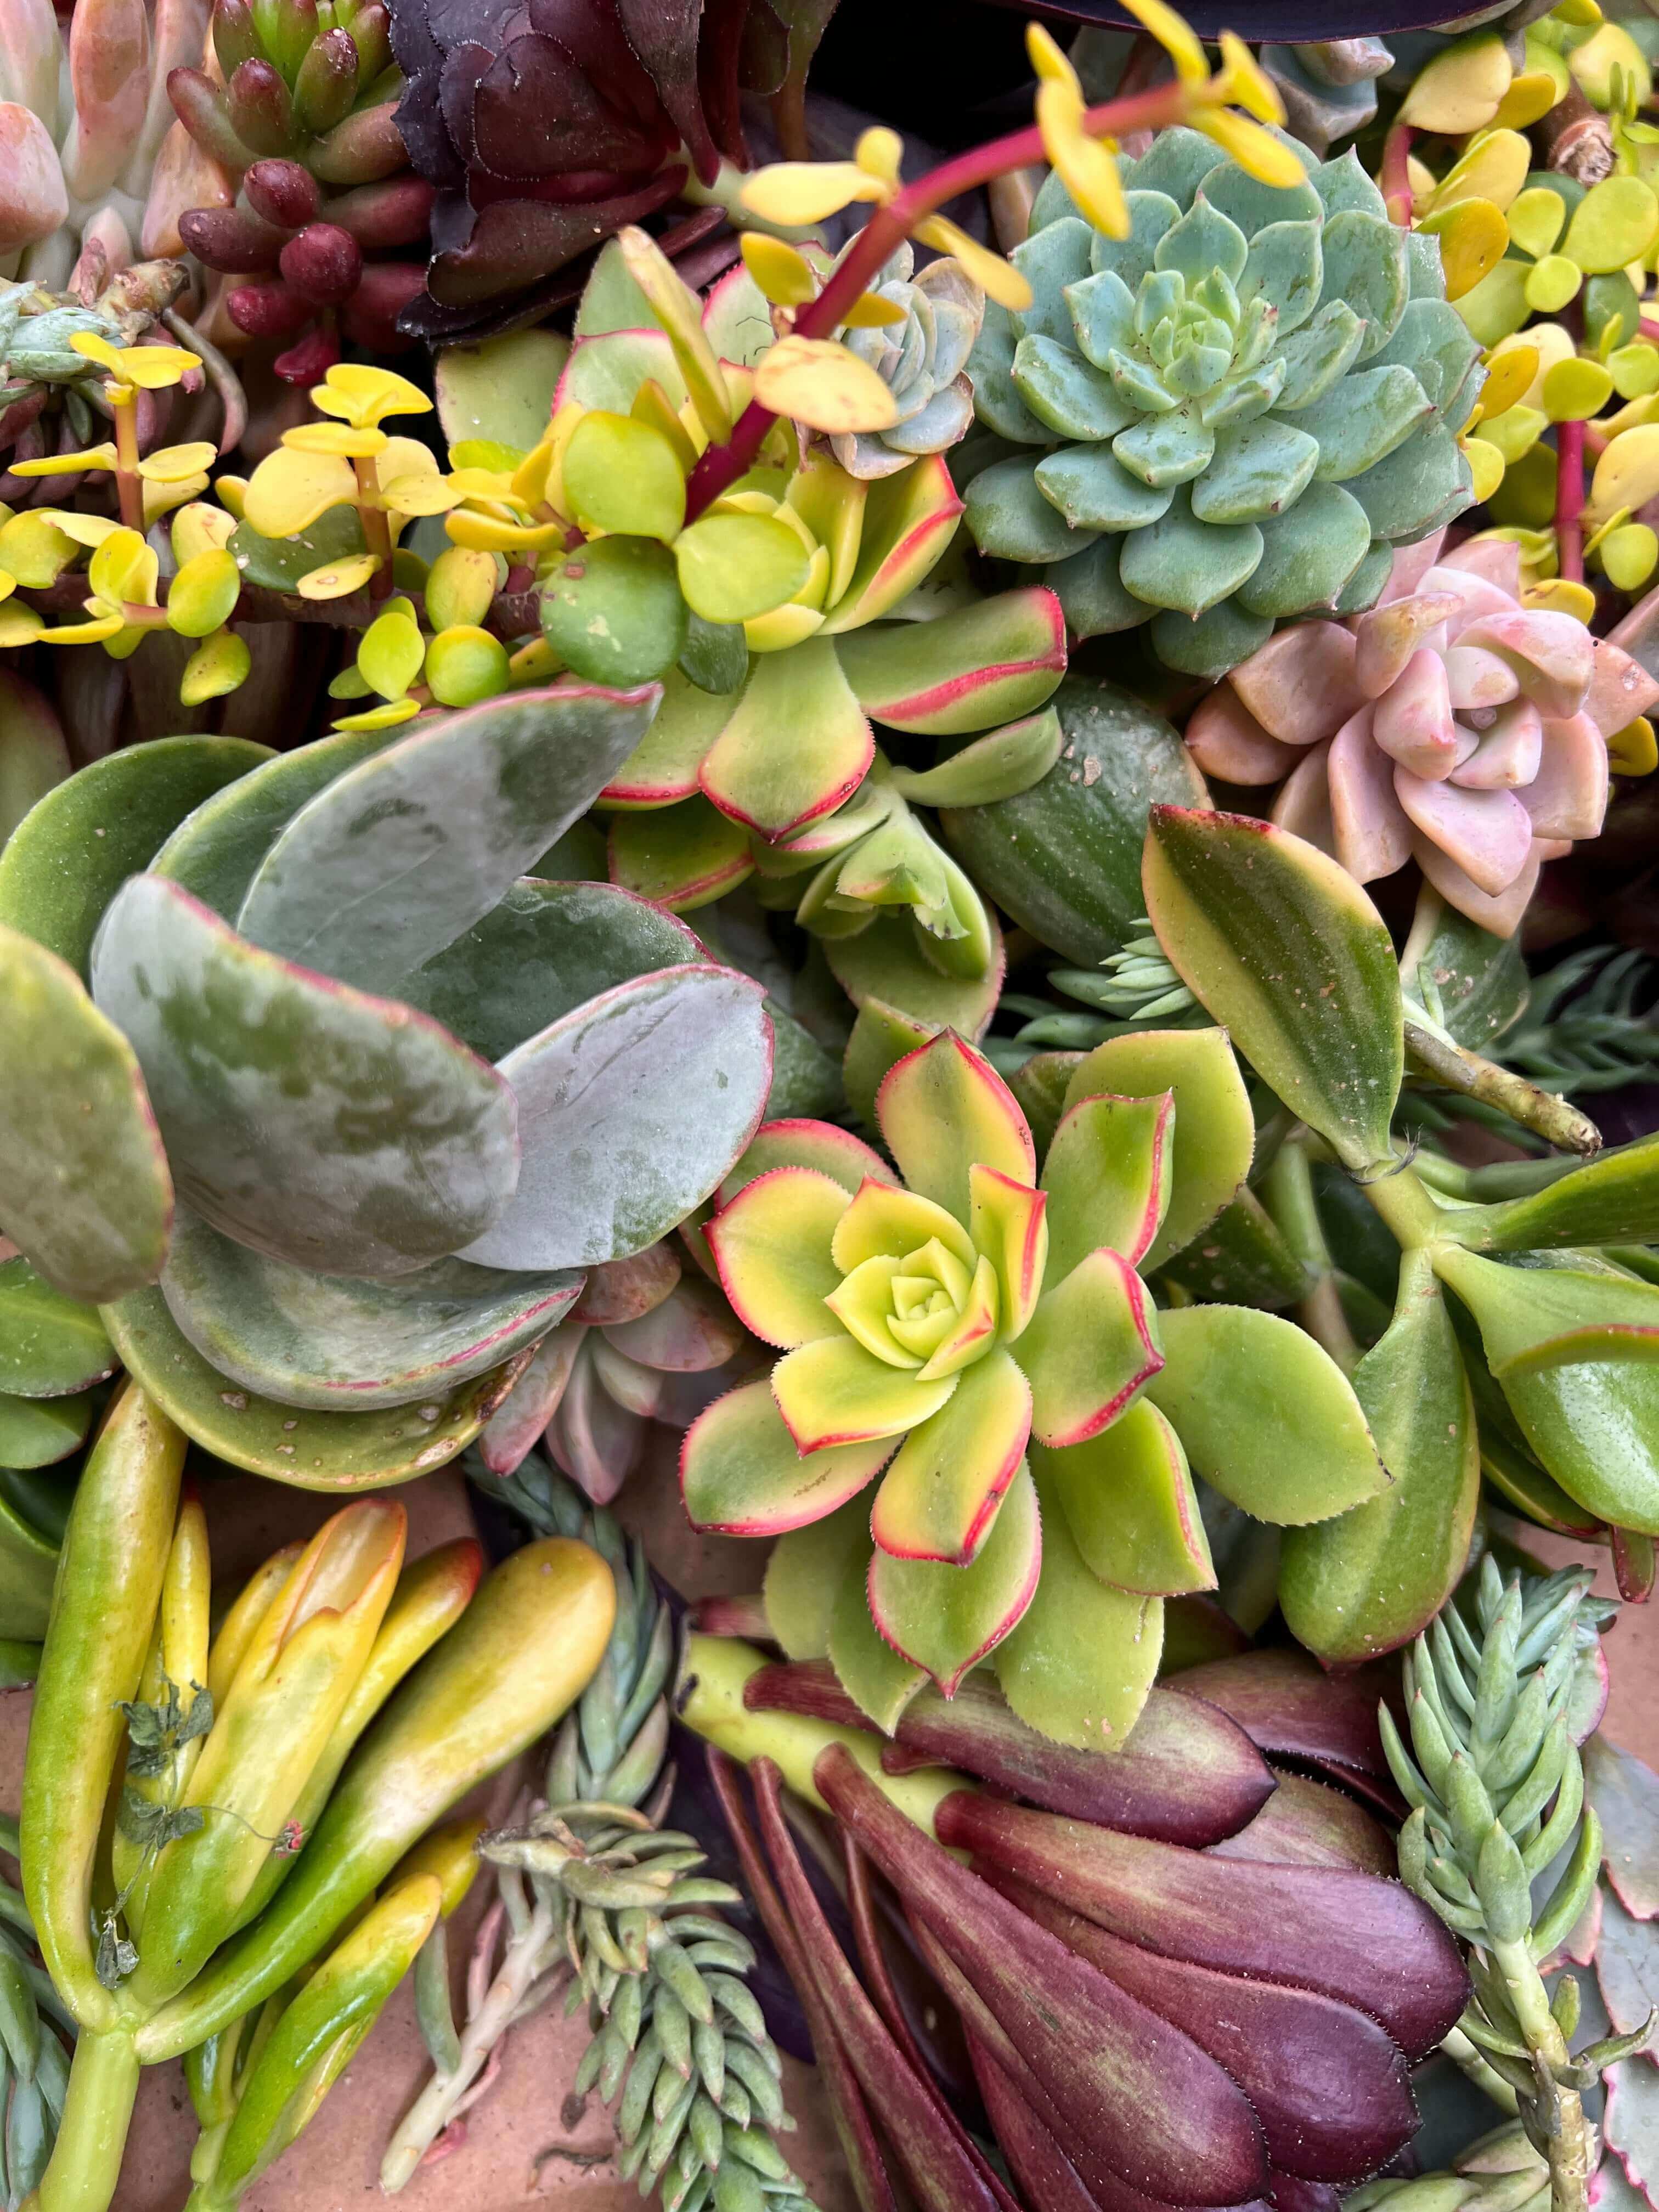 Diverse and large succulent cuttings set, emphasizing the unique textures and shapes suited for creative gardening.